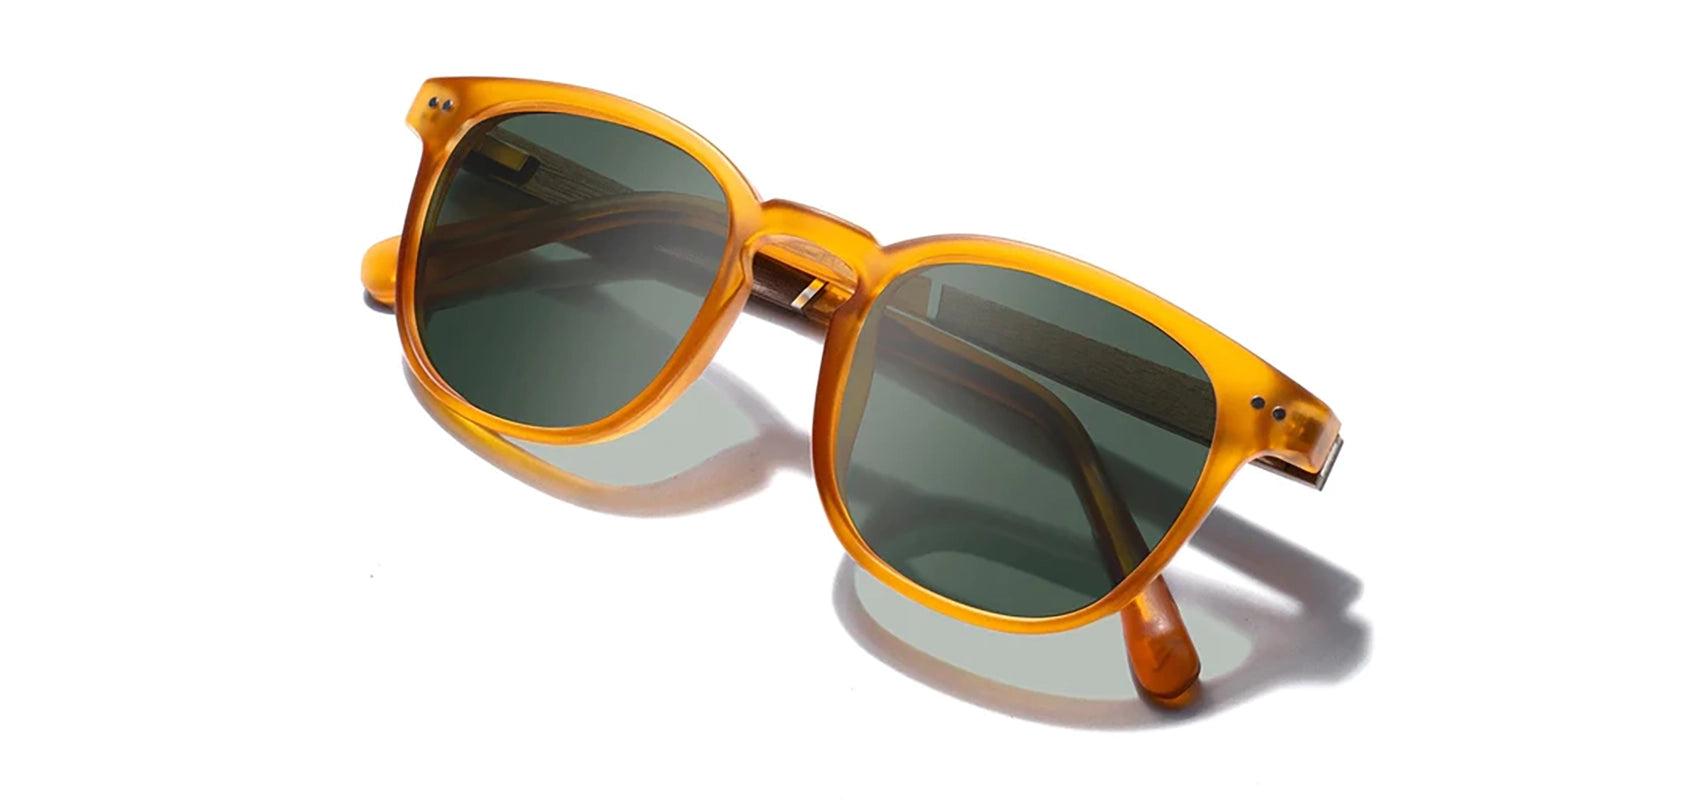 Camp Topo Sunglasses in Matte Orange / Walnut Frames with basic G15 polarized lenses, front angled folded temple view